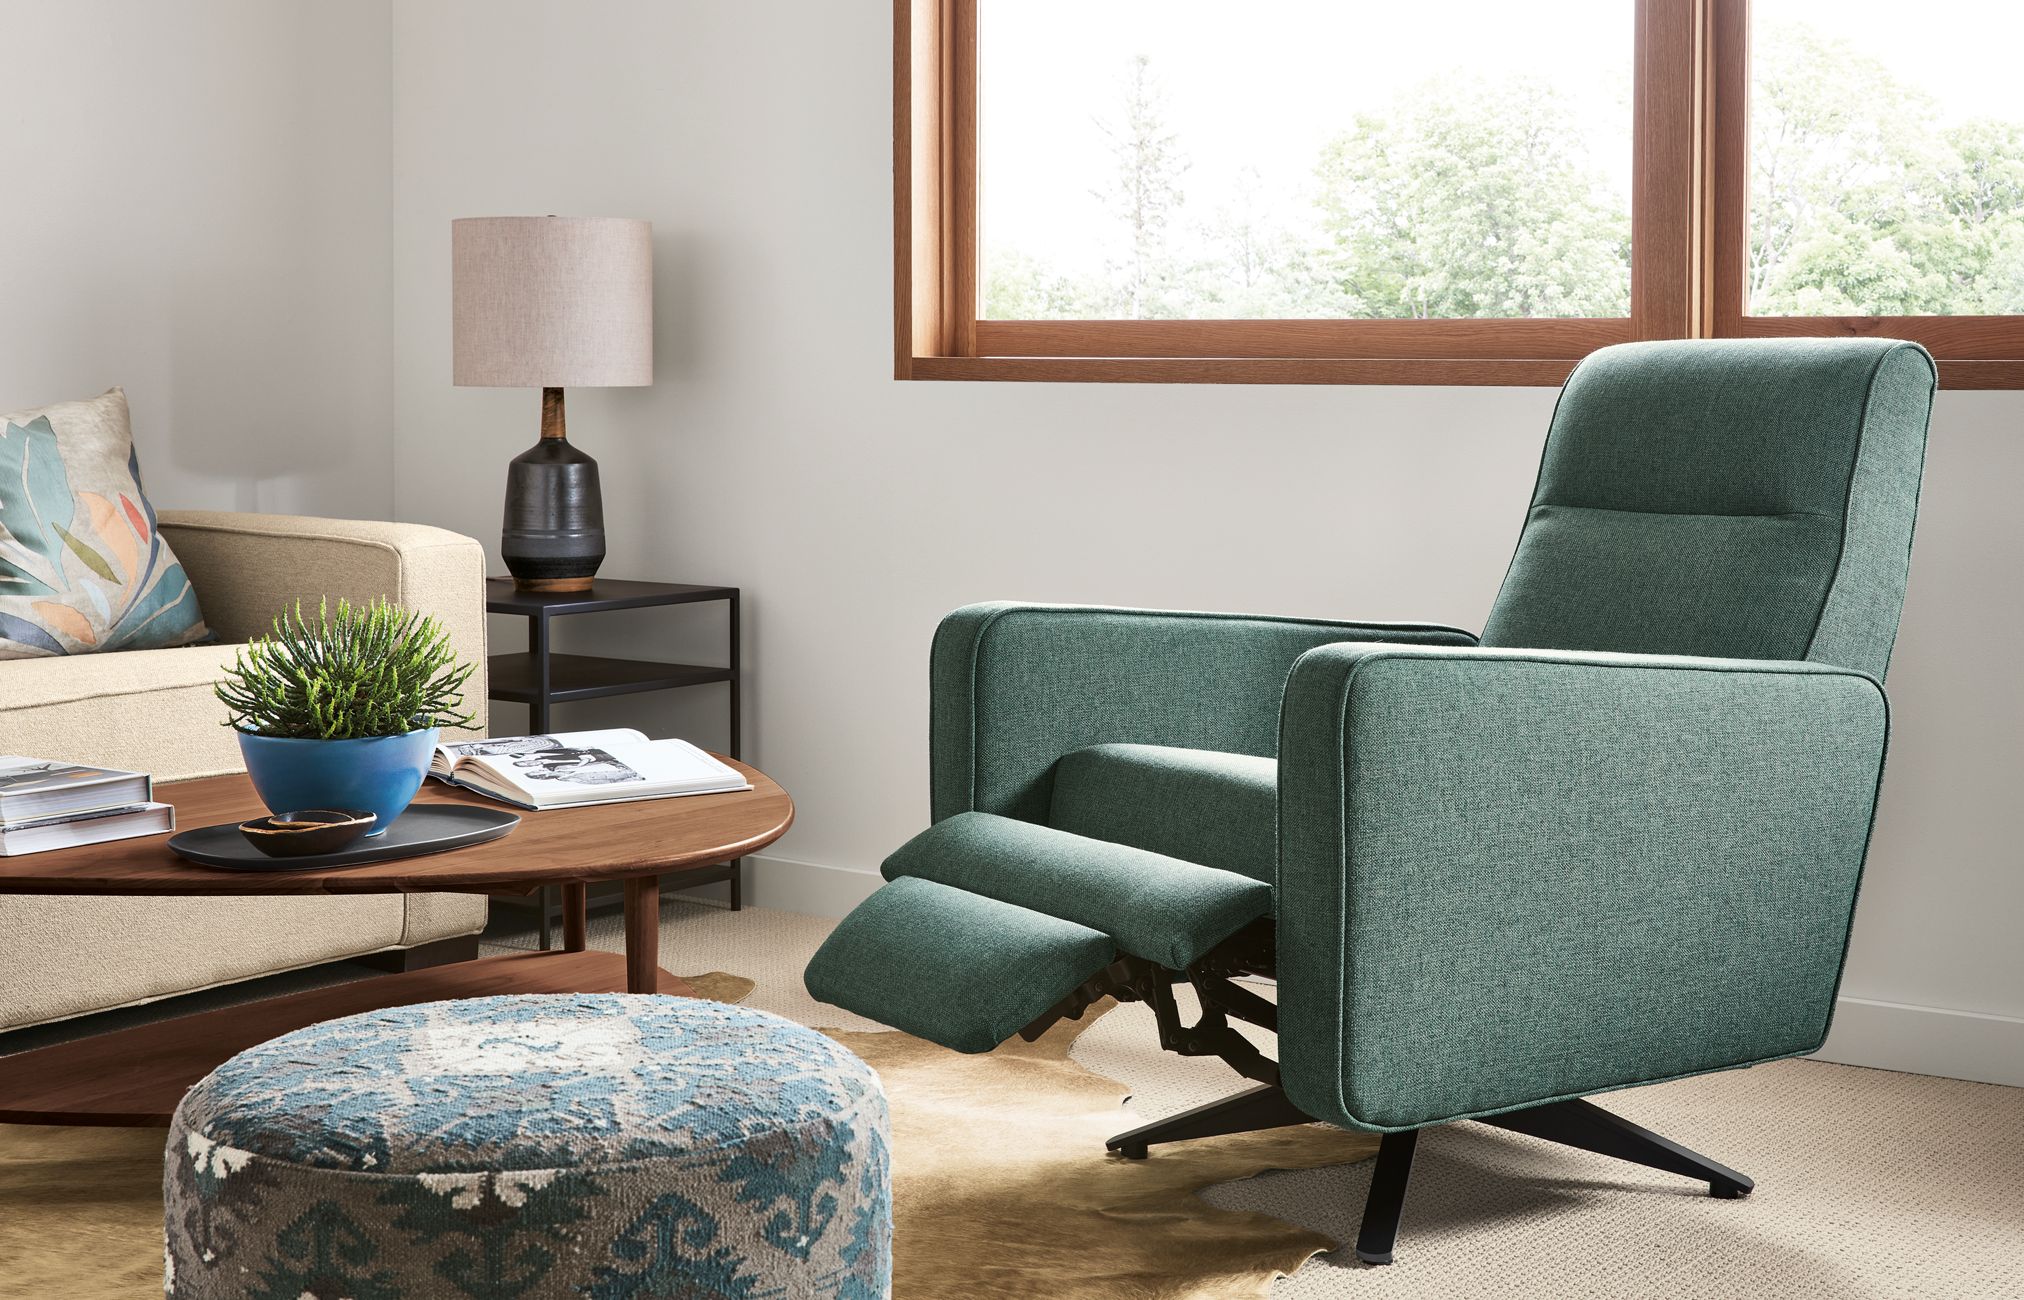 Hayden recliner in turquoise fabric extended in living room.